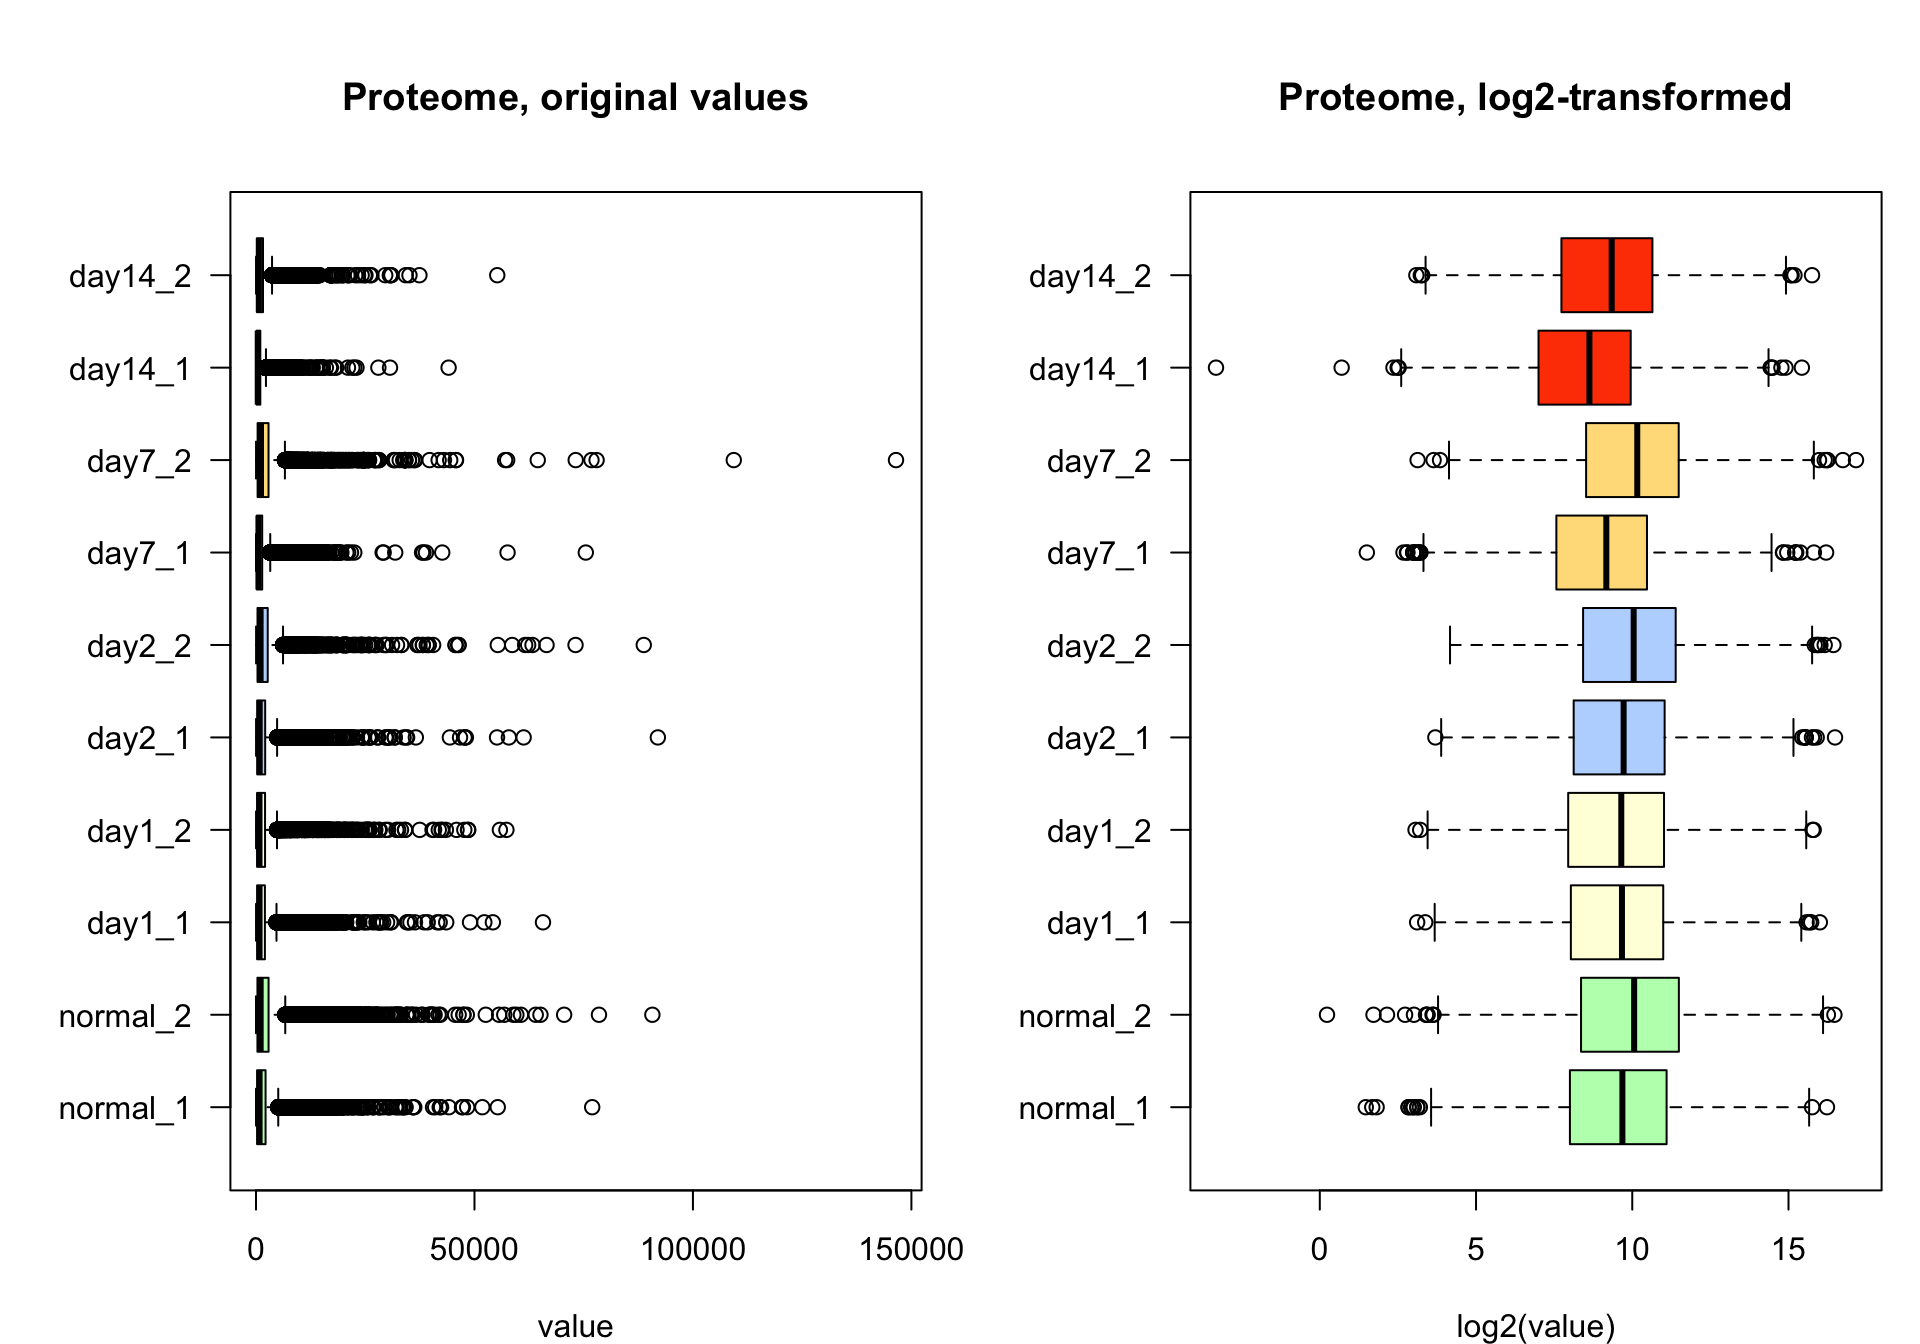 Box plots of proteome data before (left) and after (right) log2 transformation. 